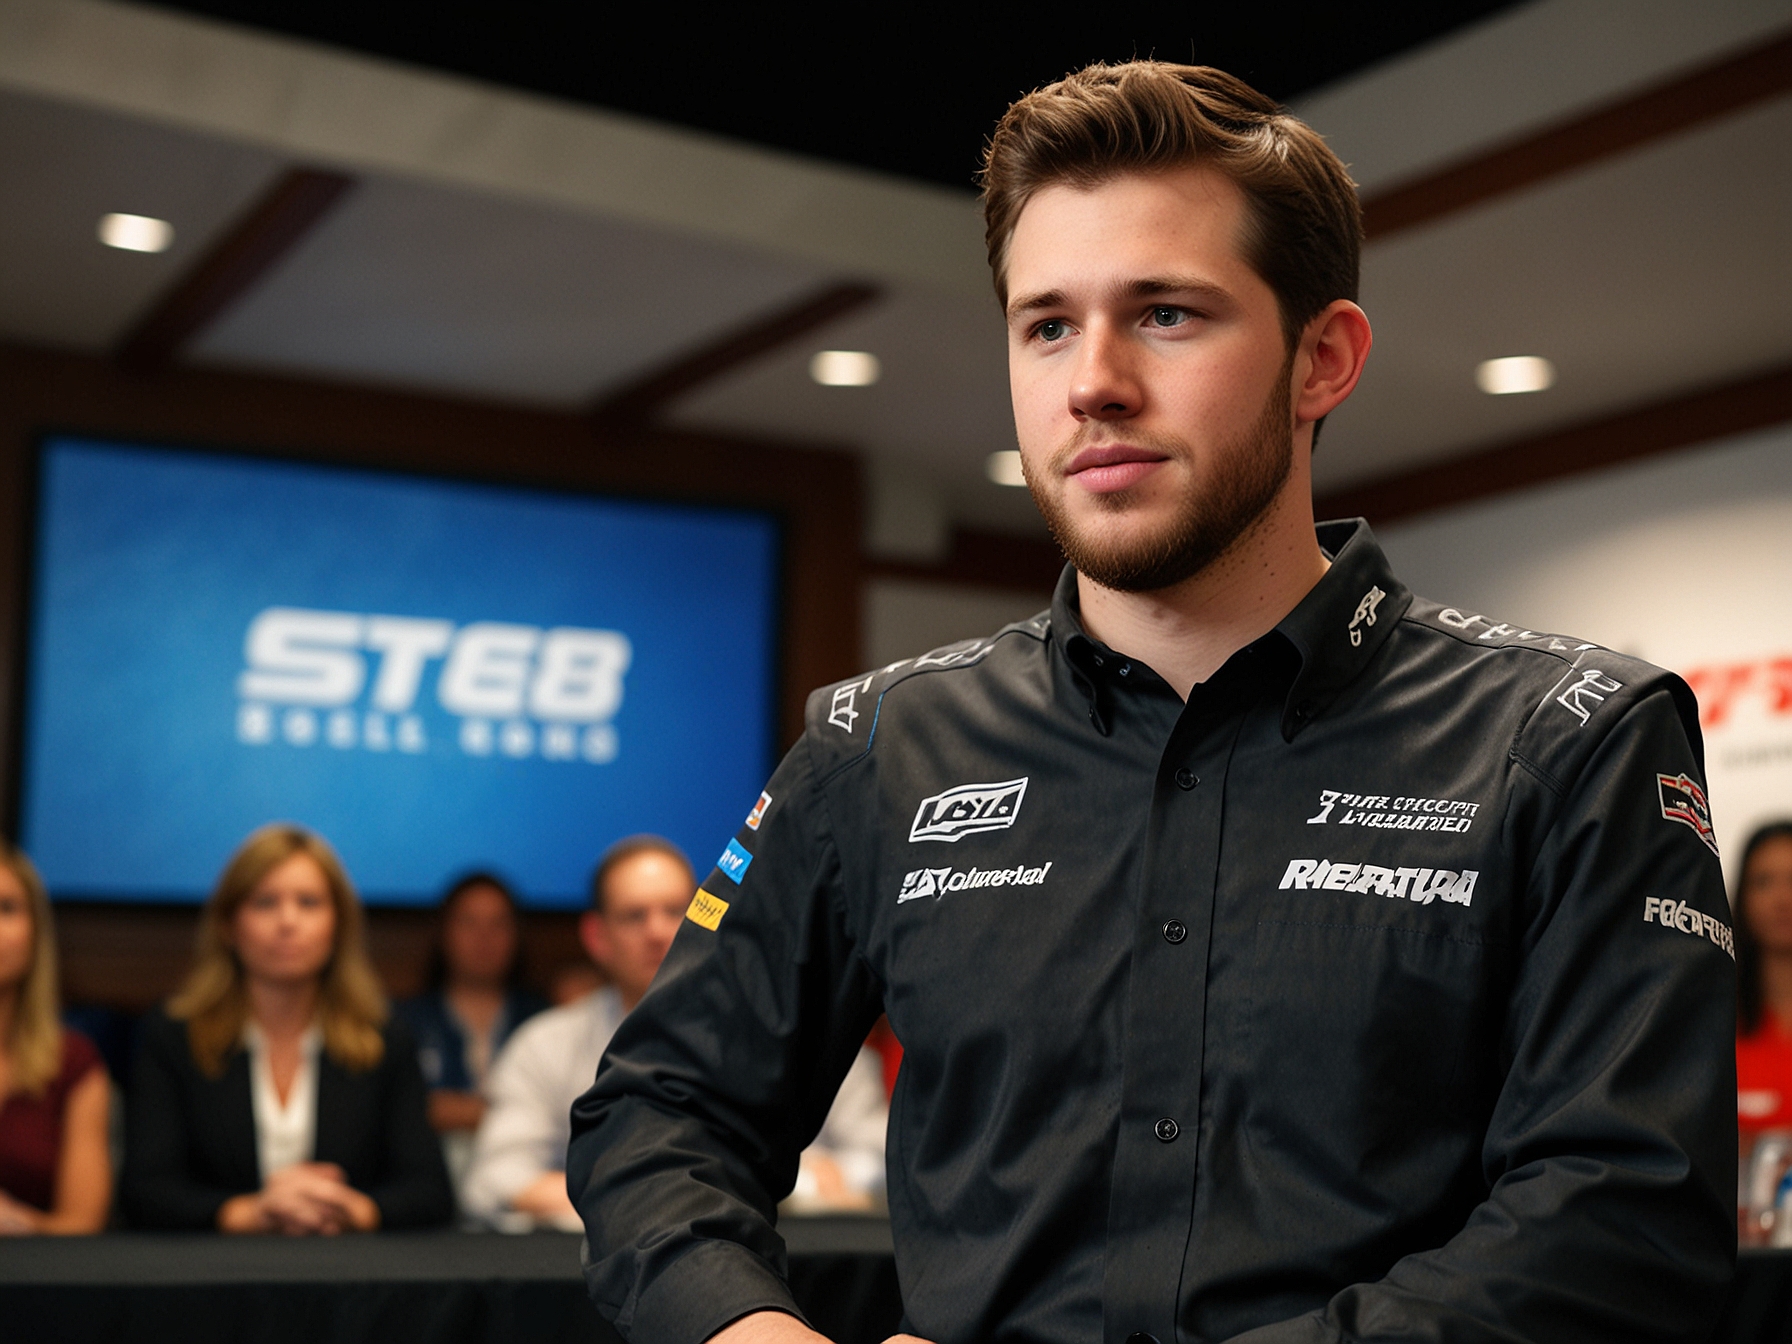 Chase Briscoe speaks at a press conference, emphasizing his commitment to Stewart-Haas Racing amid growing speculation about a potential switch to Joe Gibbs Racing.